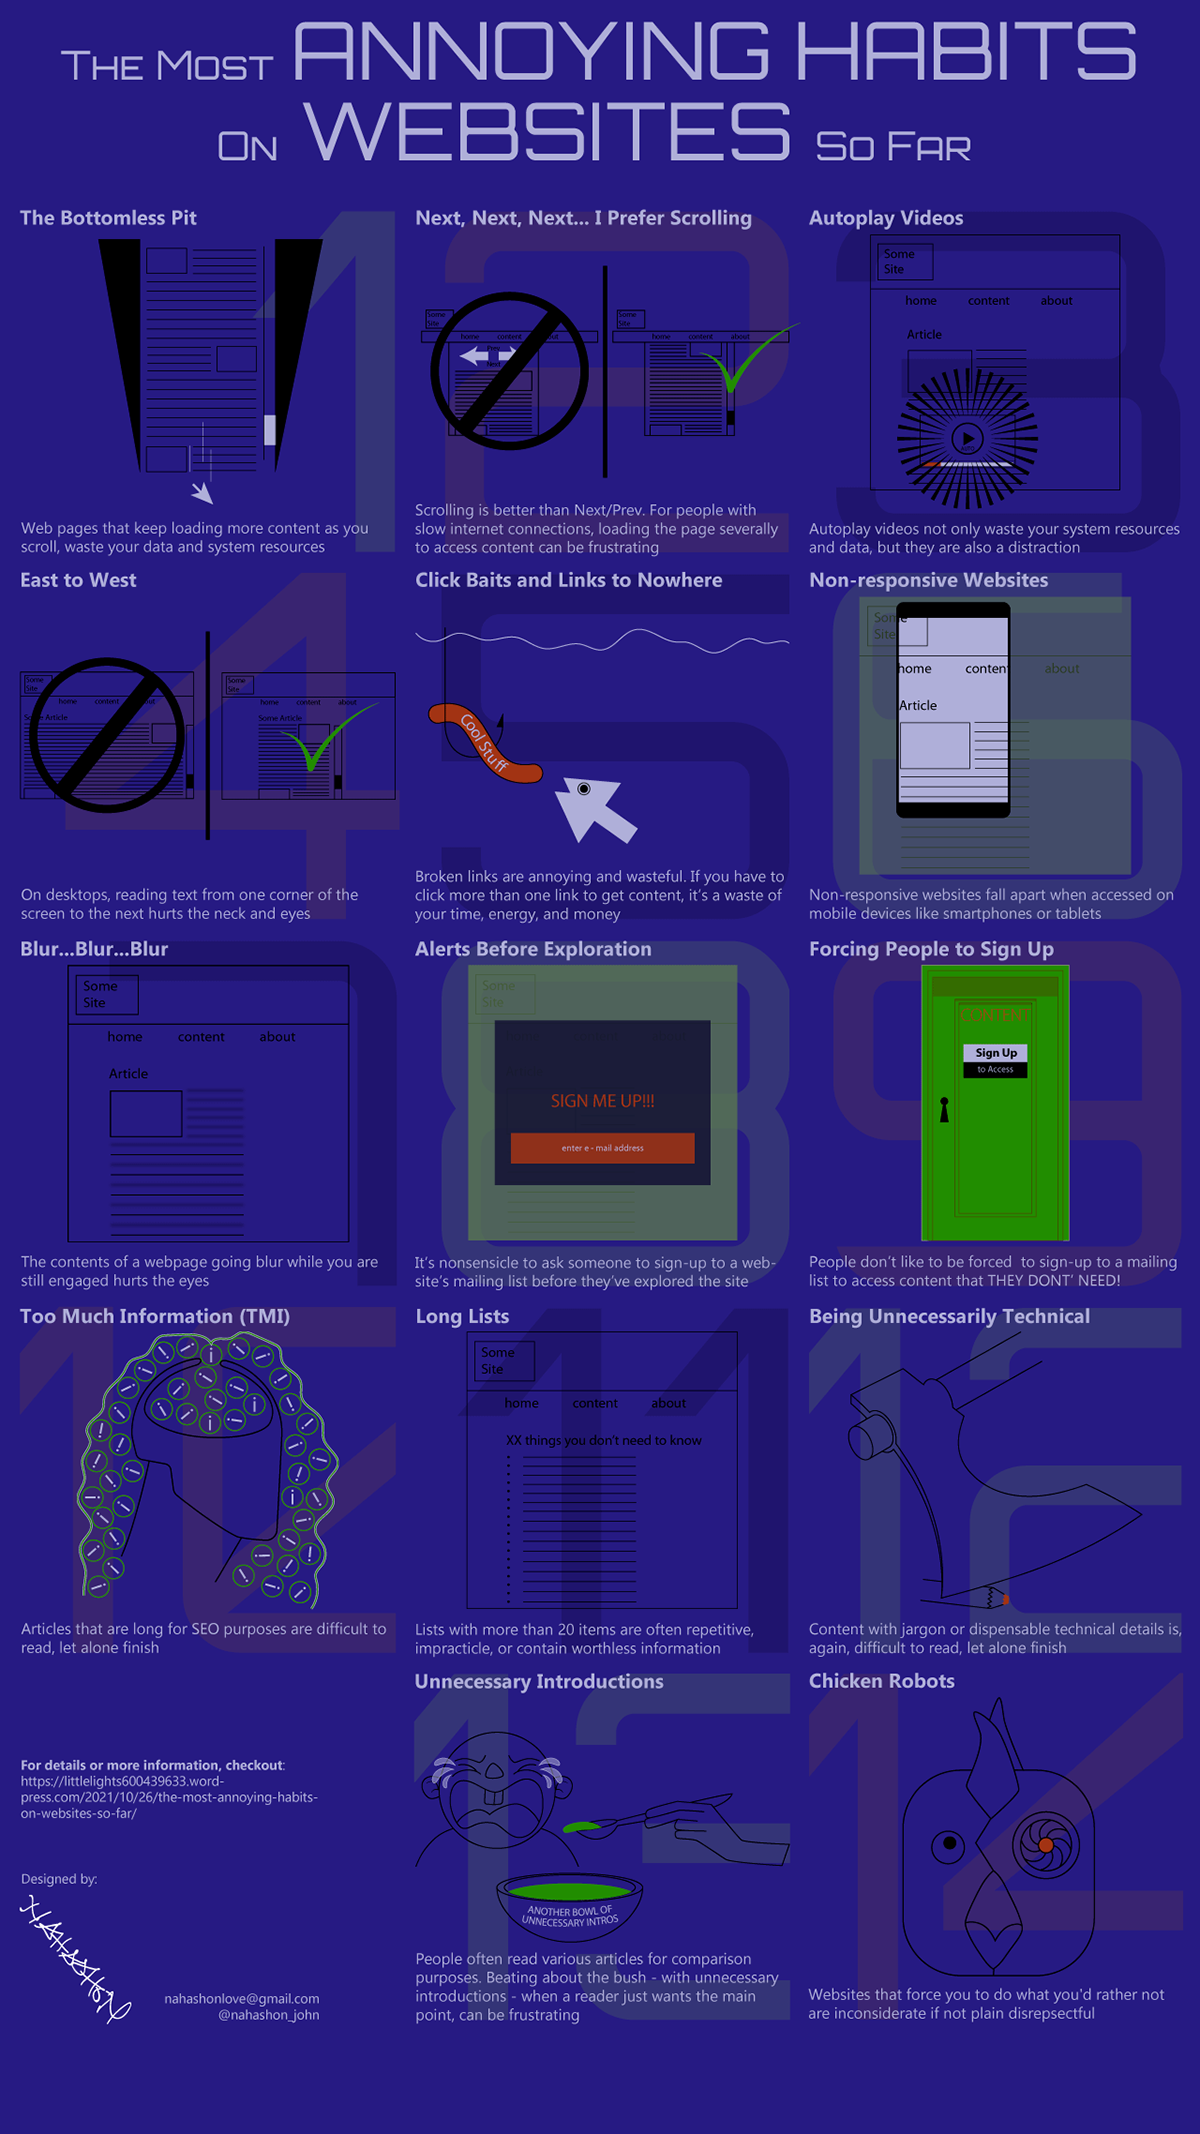 Infographic about the most annoying habits on websites so far